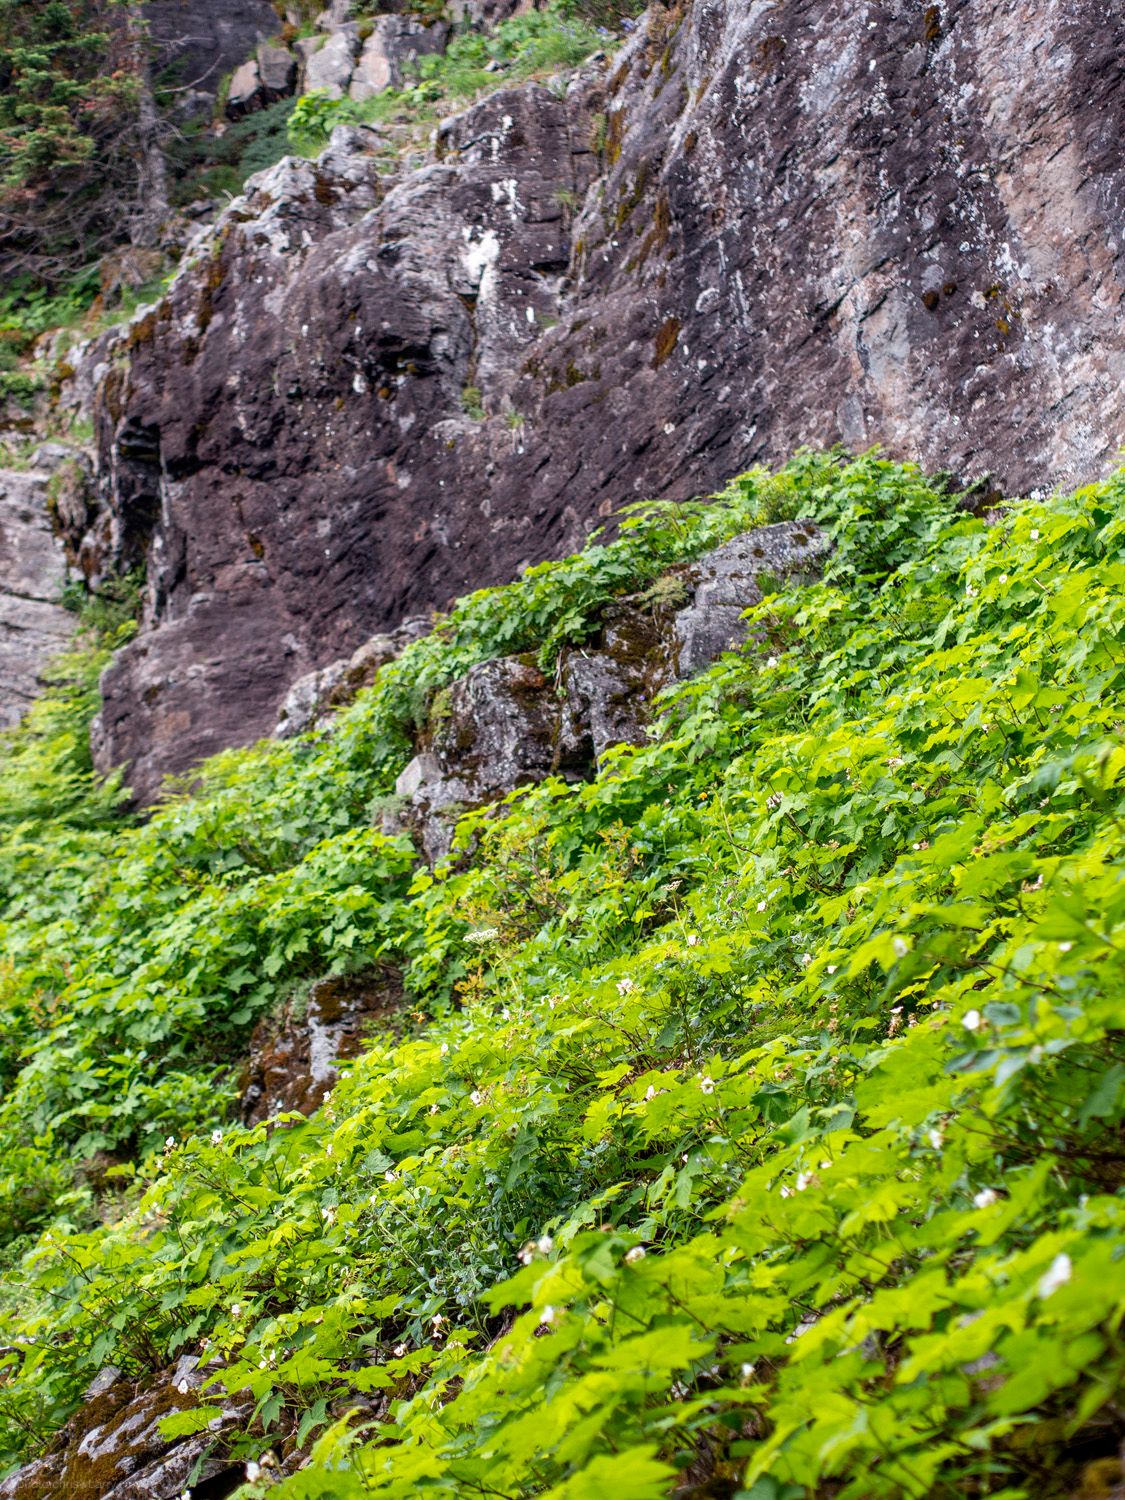 Photograph of greenery growing on the side of some large sheer rocks